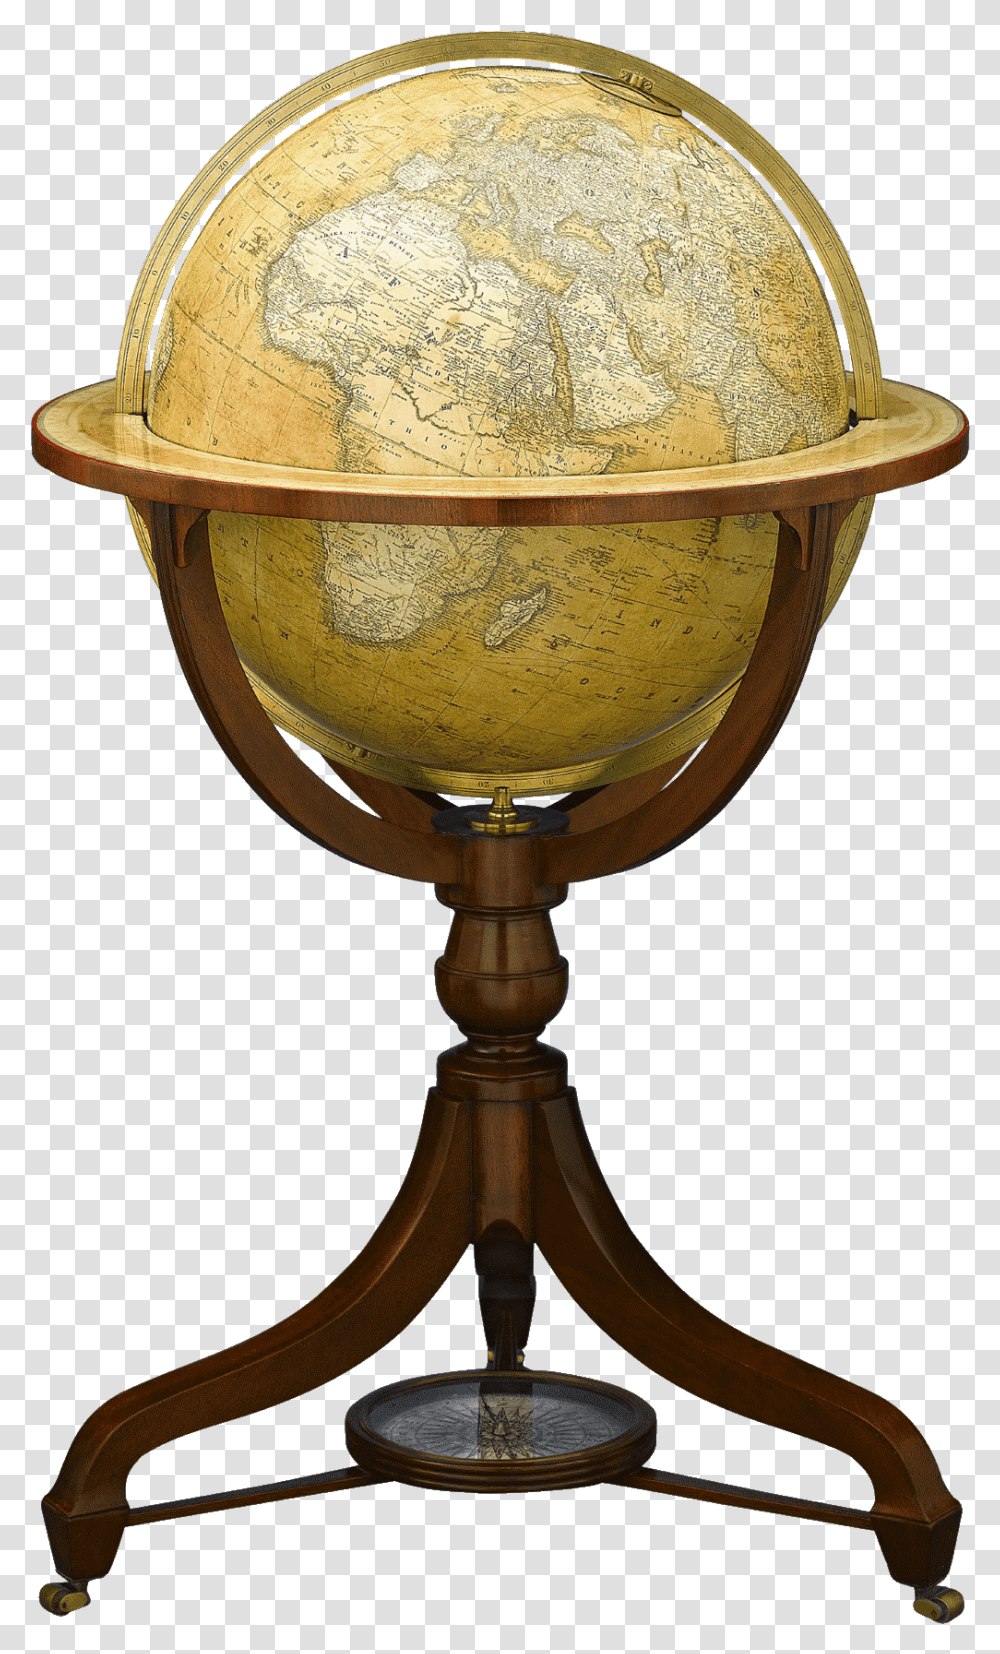 Inch Celestial Amp Terrestrial Globes By Newton Amp Newton Celestial Globe, Lamp, Outer Space, Astronomy, Universe Transparent Png